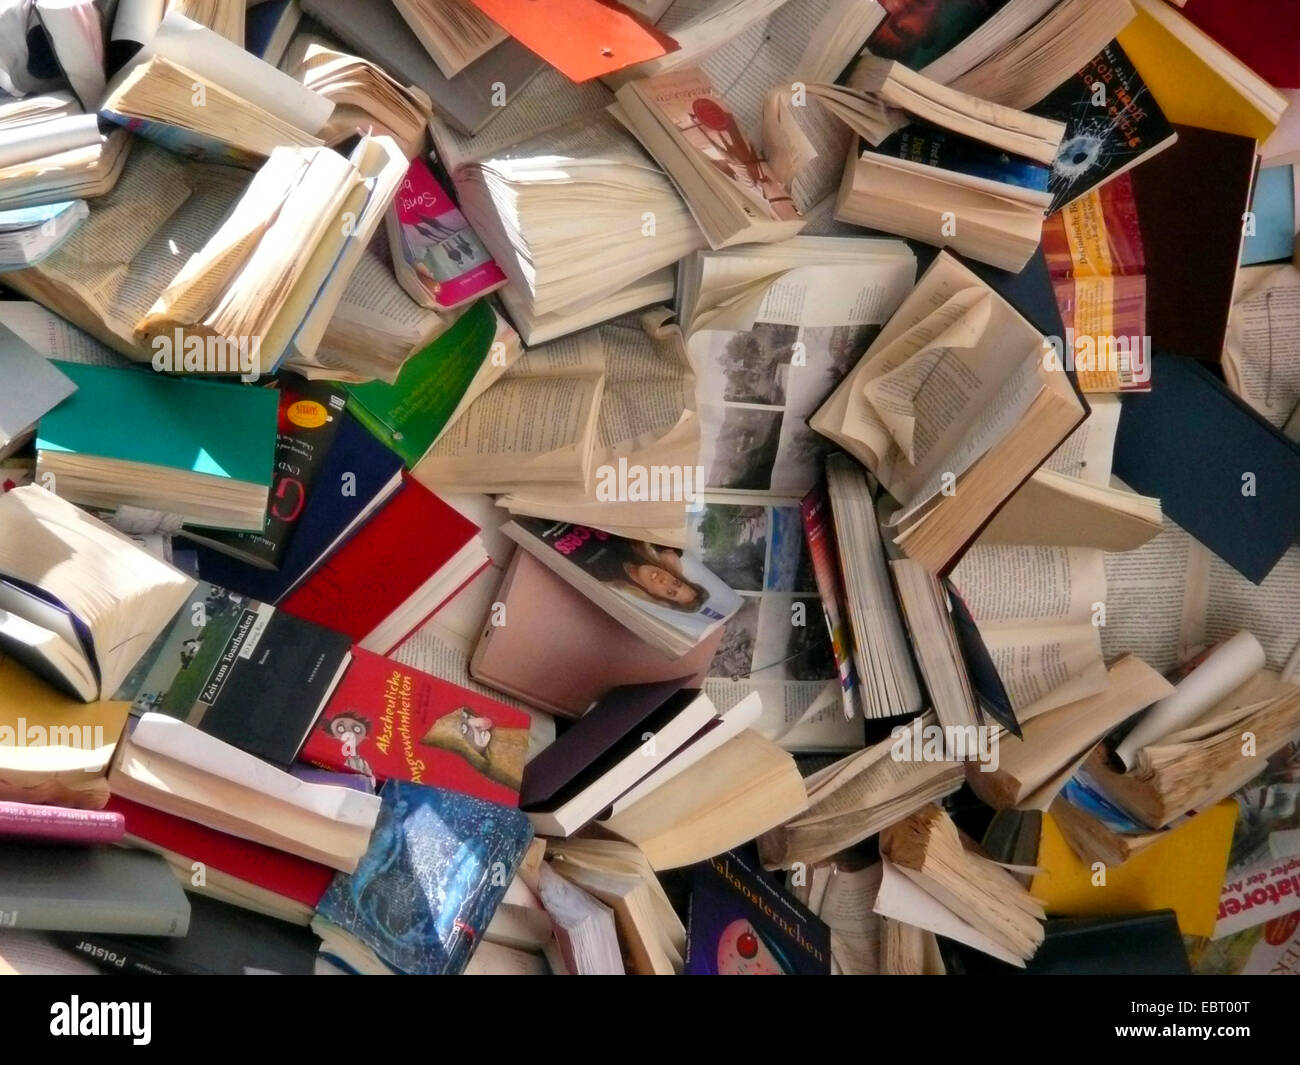 a litter of books Stock Photo